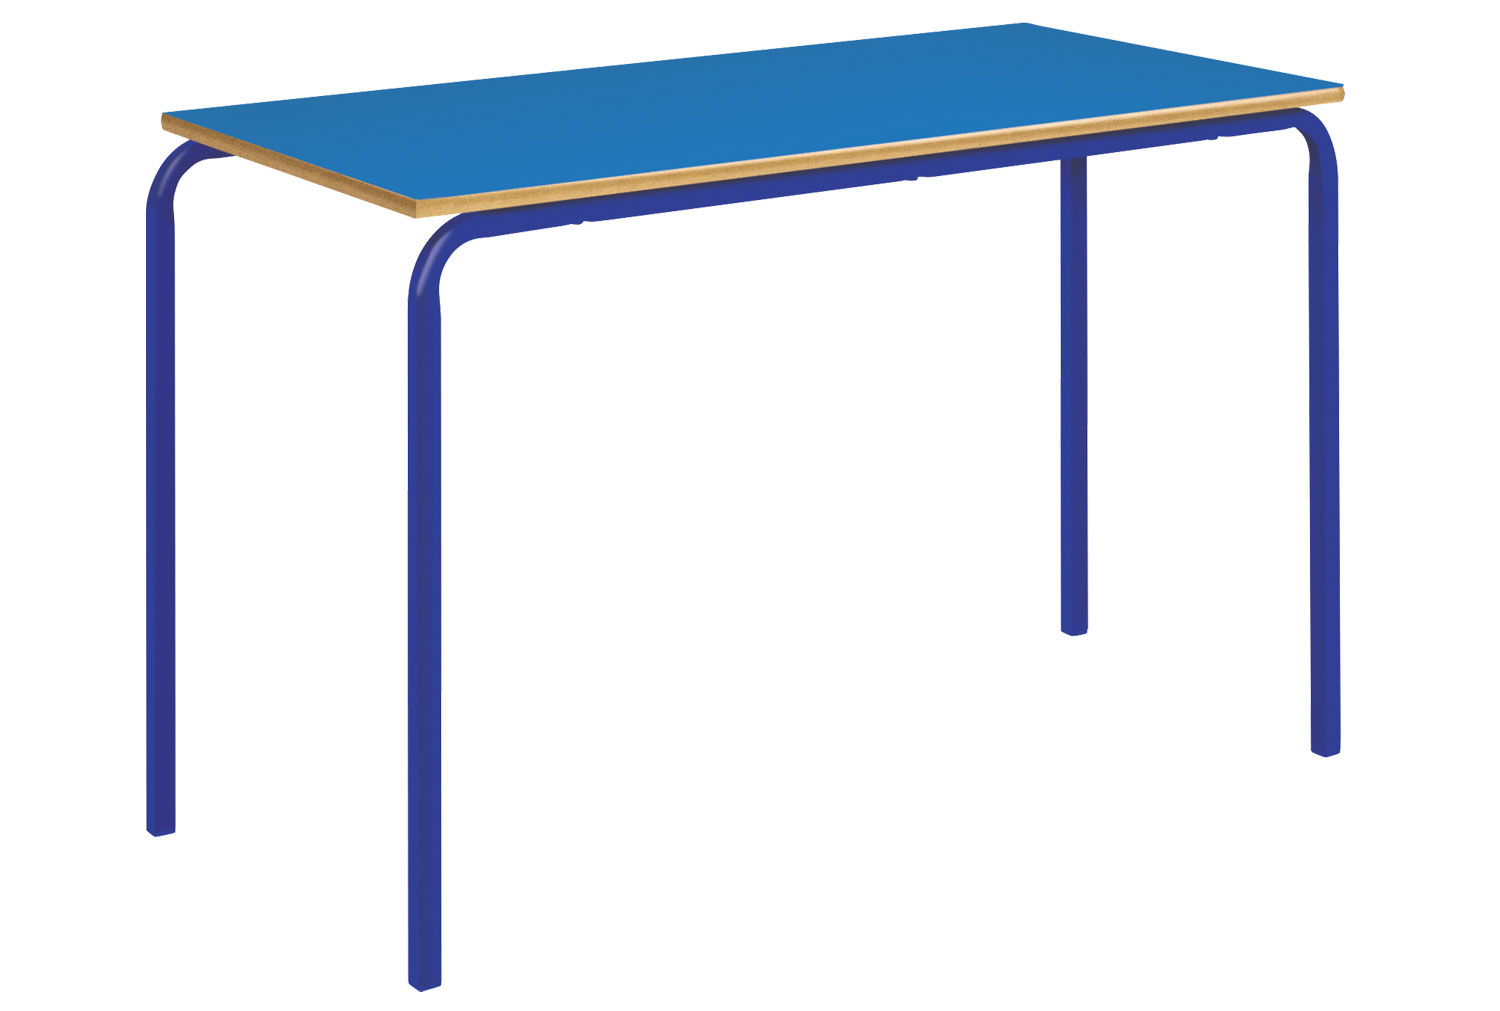 Qty 4 - Colour Edition Rectangular Crush Bent School Classroom Tables, 8-11 Years - 110wx55dx64h (cm), Red Frame, Red Top